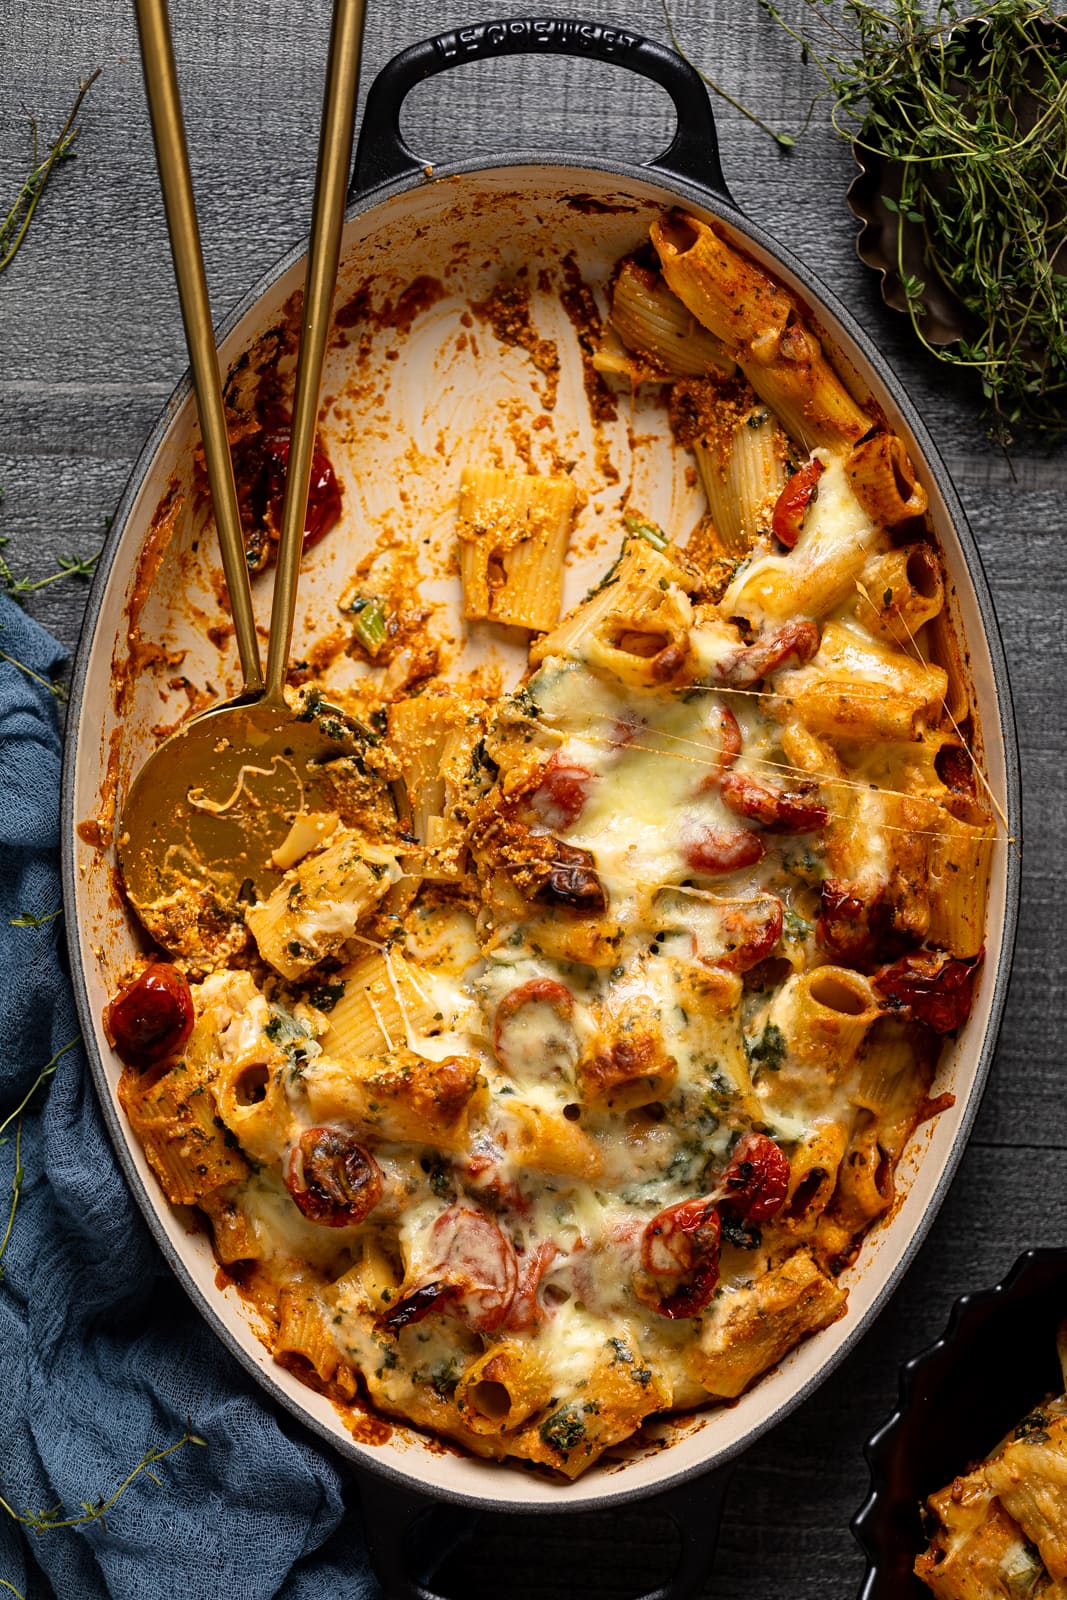 Half-empty Dutch oven of Meatless Baked Ziti with Ricotta and Mozzarella